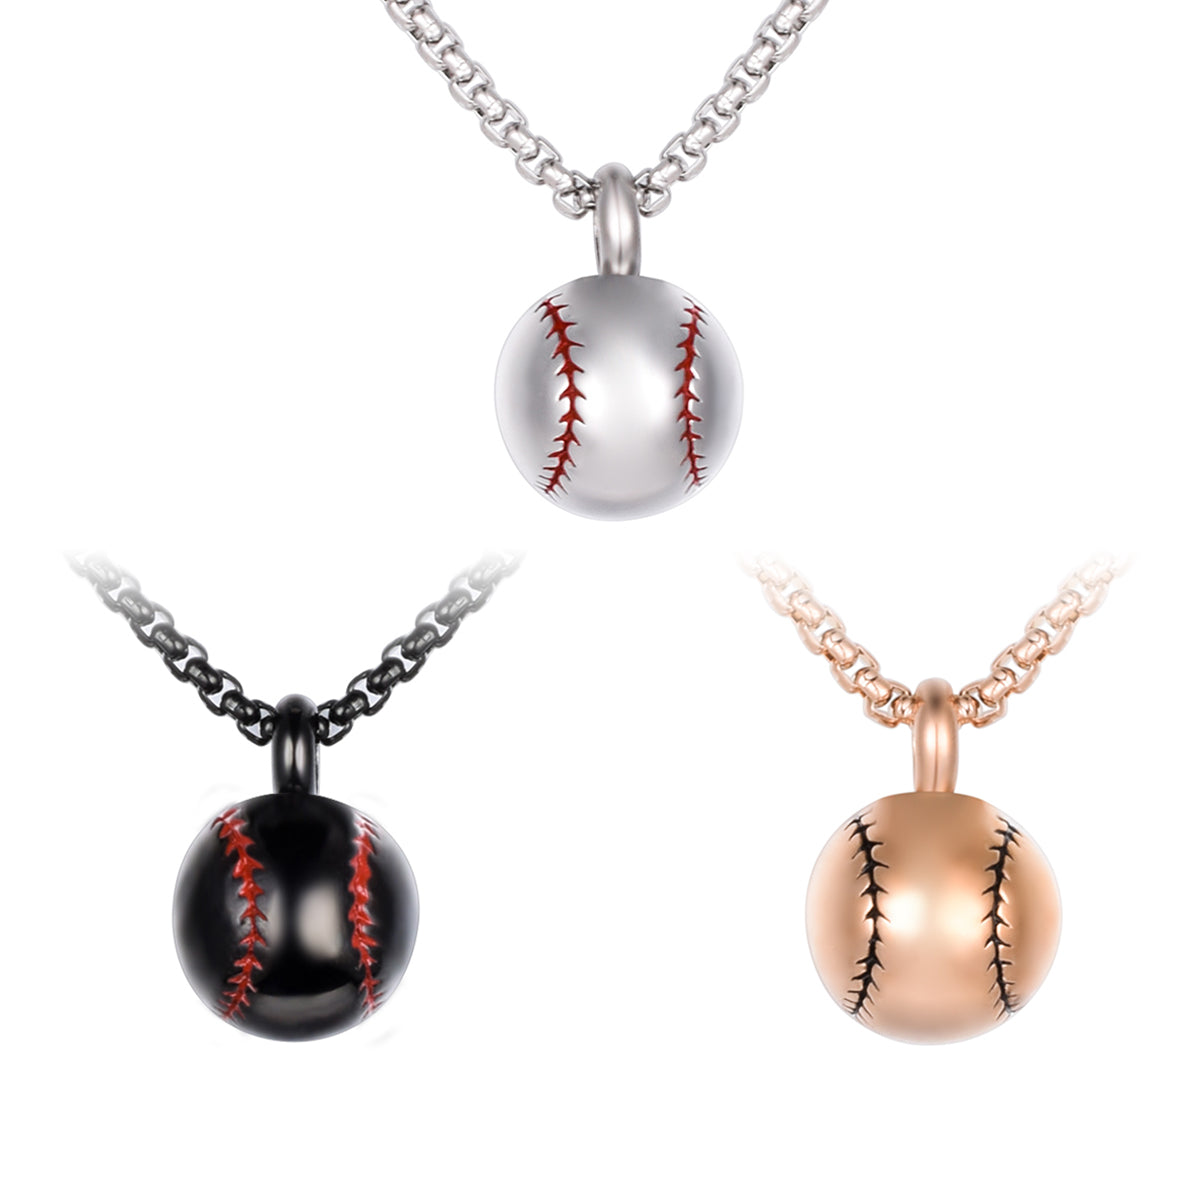 Softball Necklace Silver, Softball Gifts for Girls, Gifts for Players,  Softball Player Team Gifts, Softball Senior Gifts, Christmas Gifts - Etsy